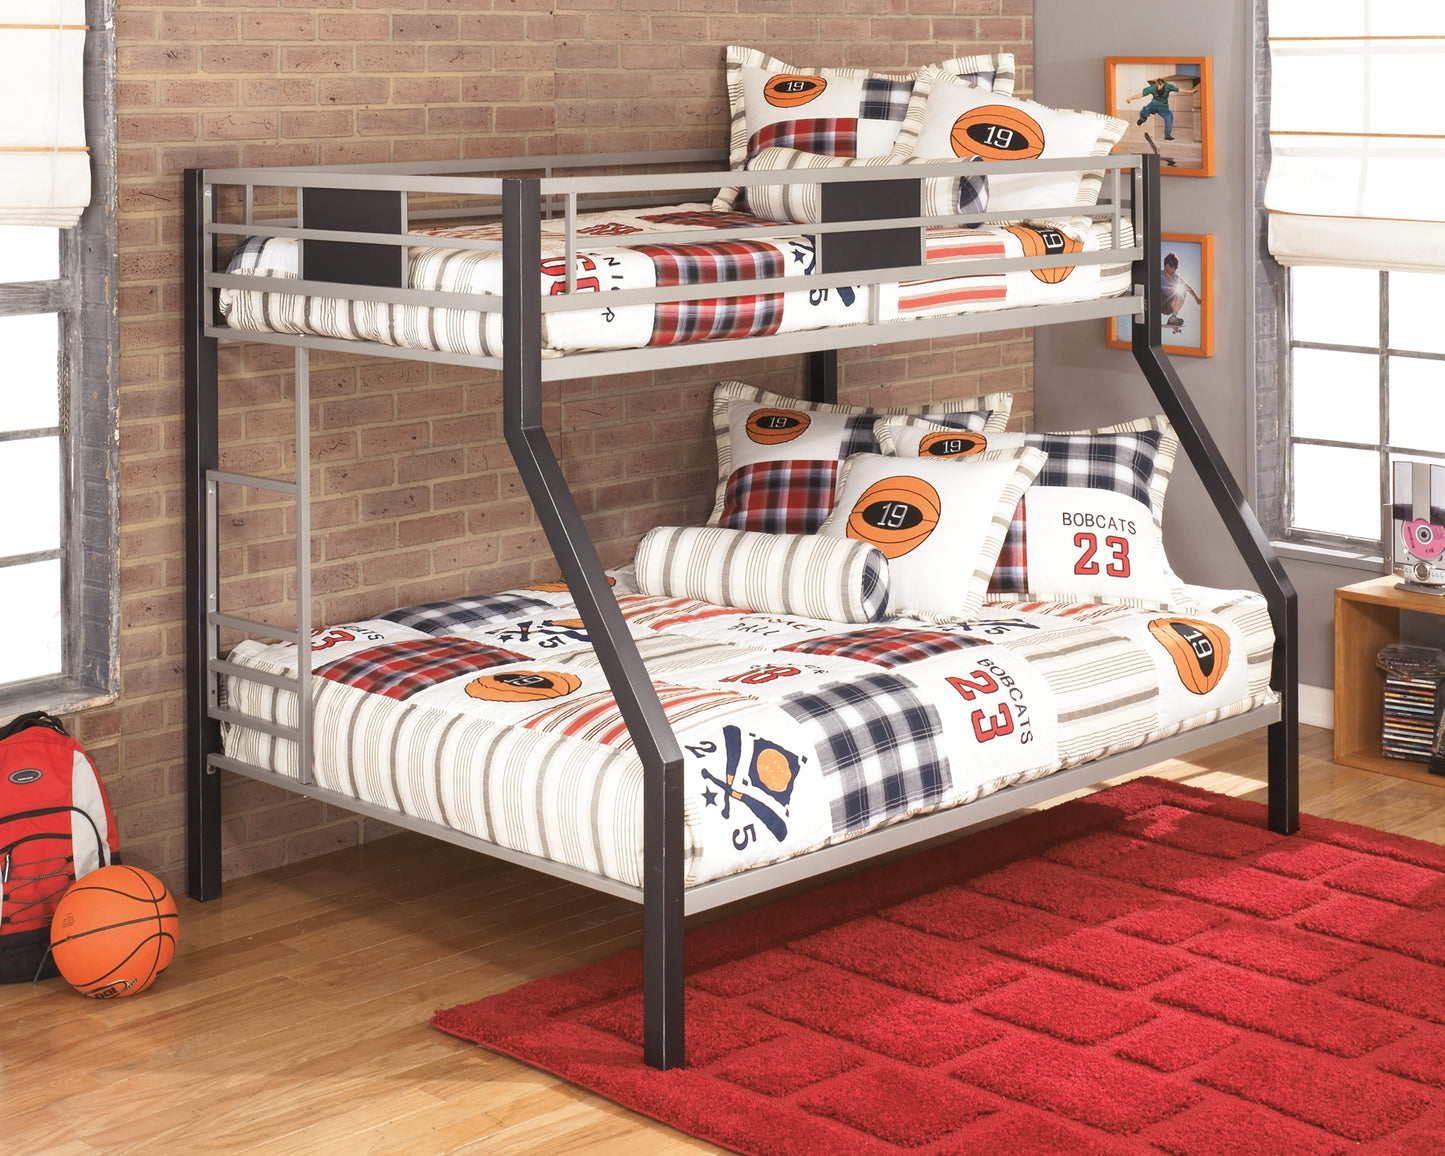 Dinsmore Twin/Full Bunk Bed w/Ladder